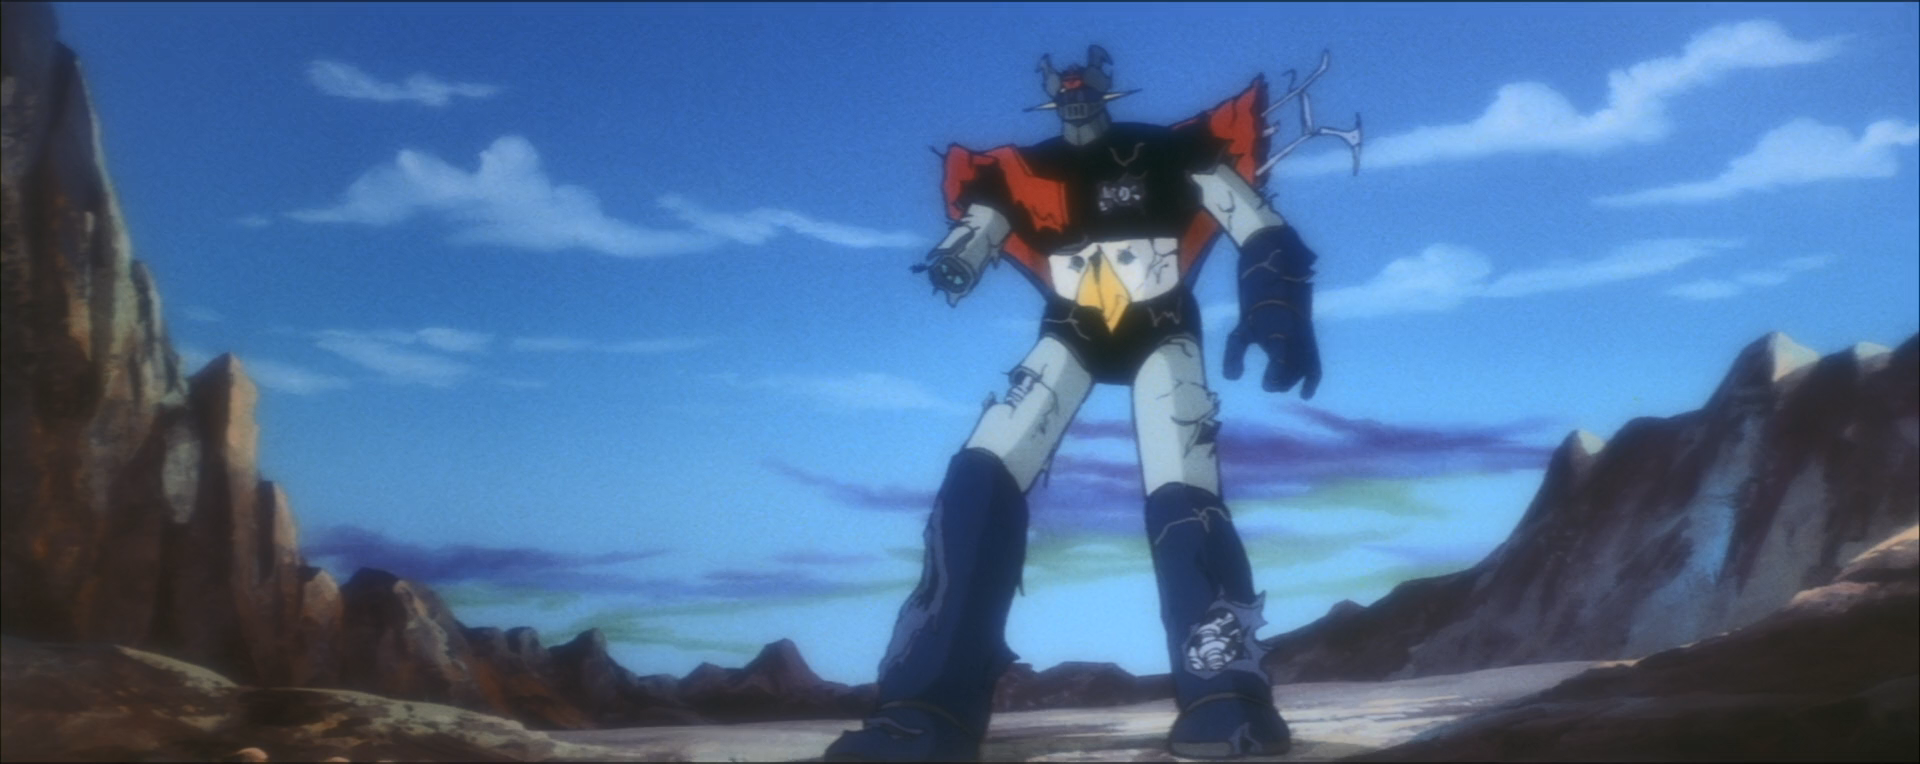 If you loved Brave Bang Bang Bravern, I’m going to recommend some robot anime